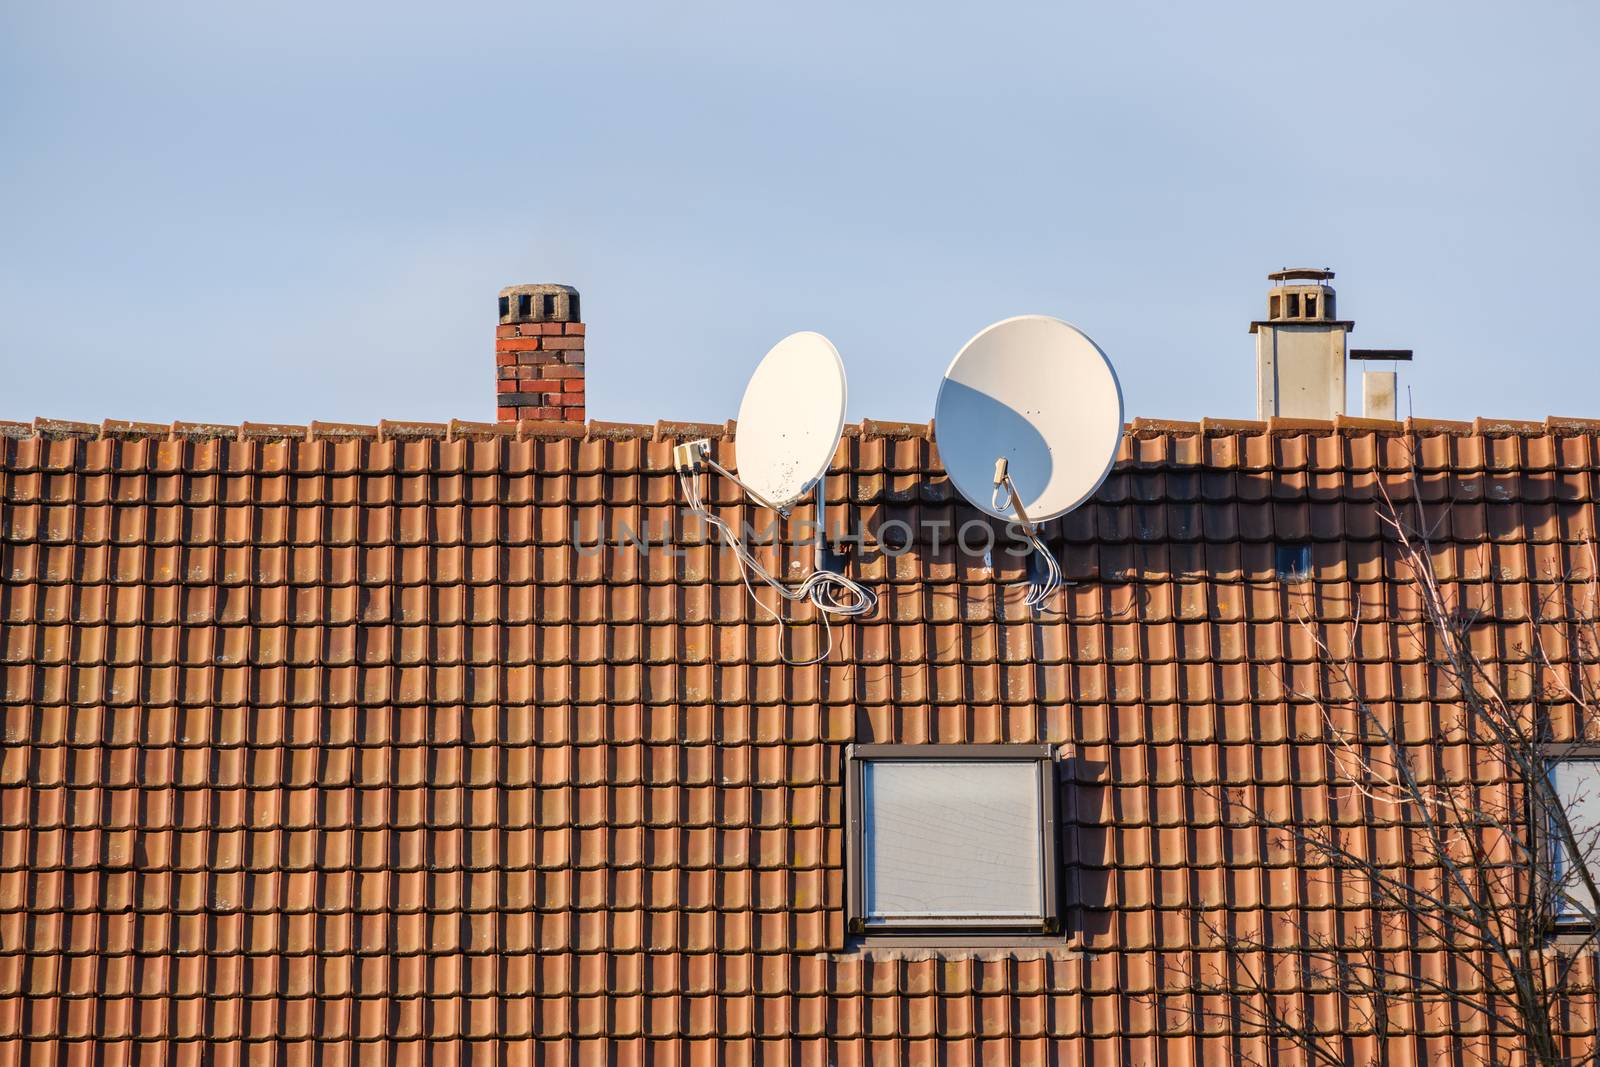 satellite dish at a roof by magann